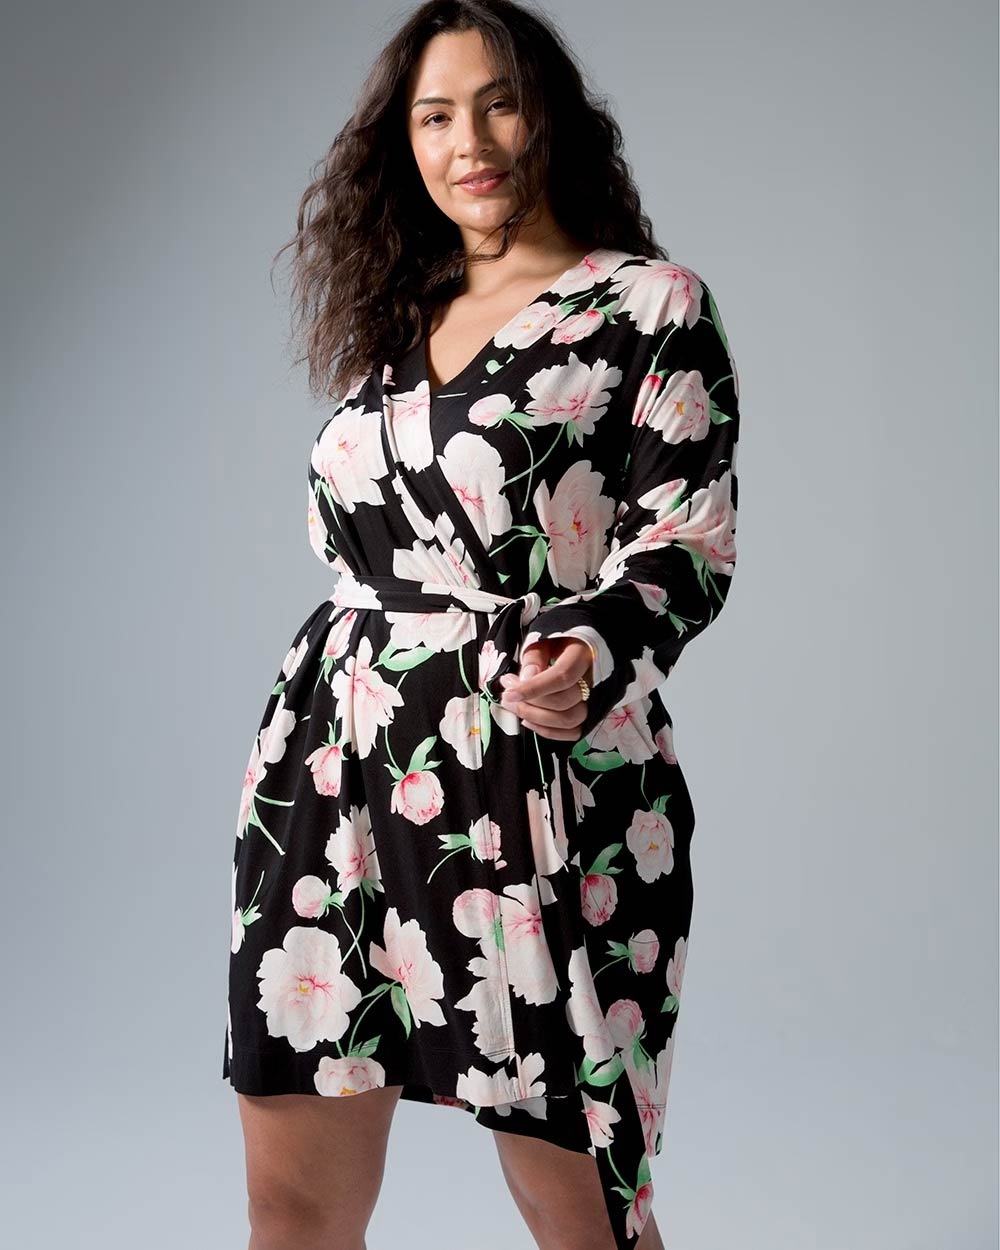 Soma<sup class=st-superscript>®</sup> women’s model wearing a black, pink, and green floral robe.